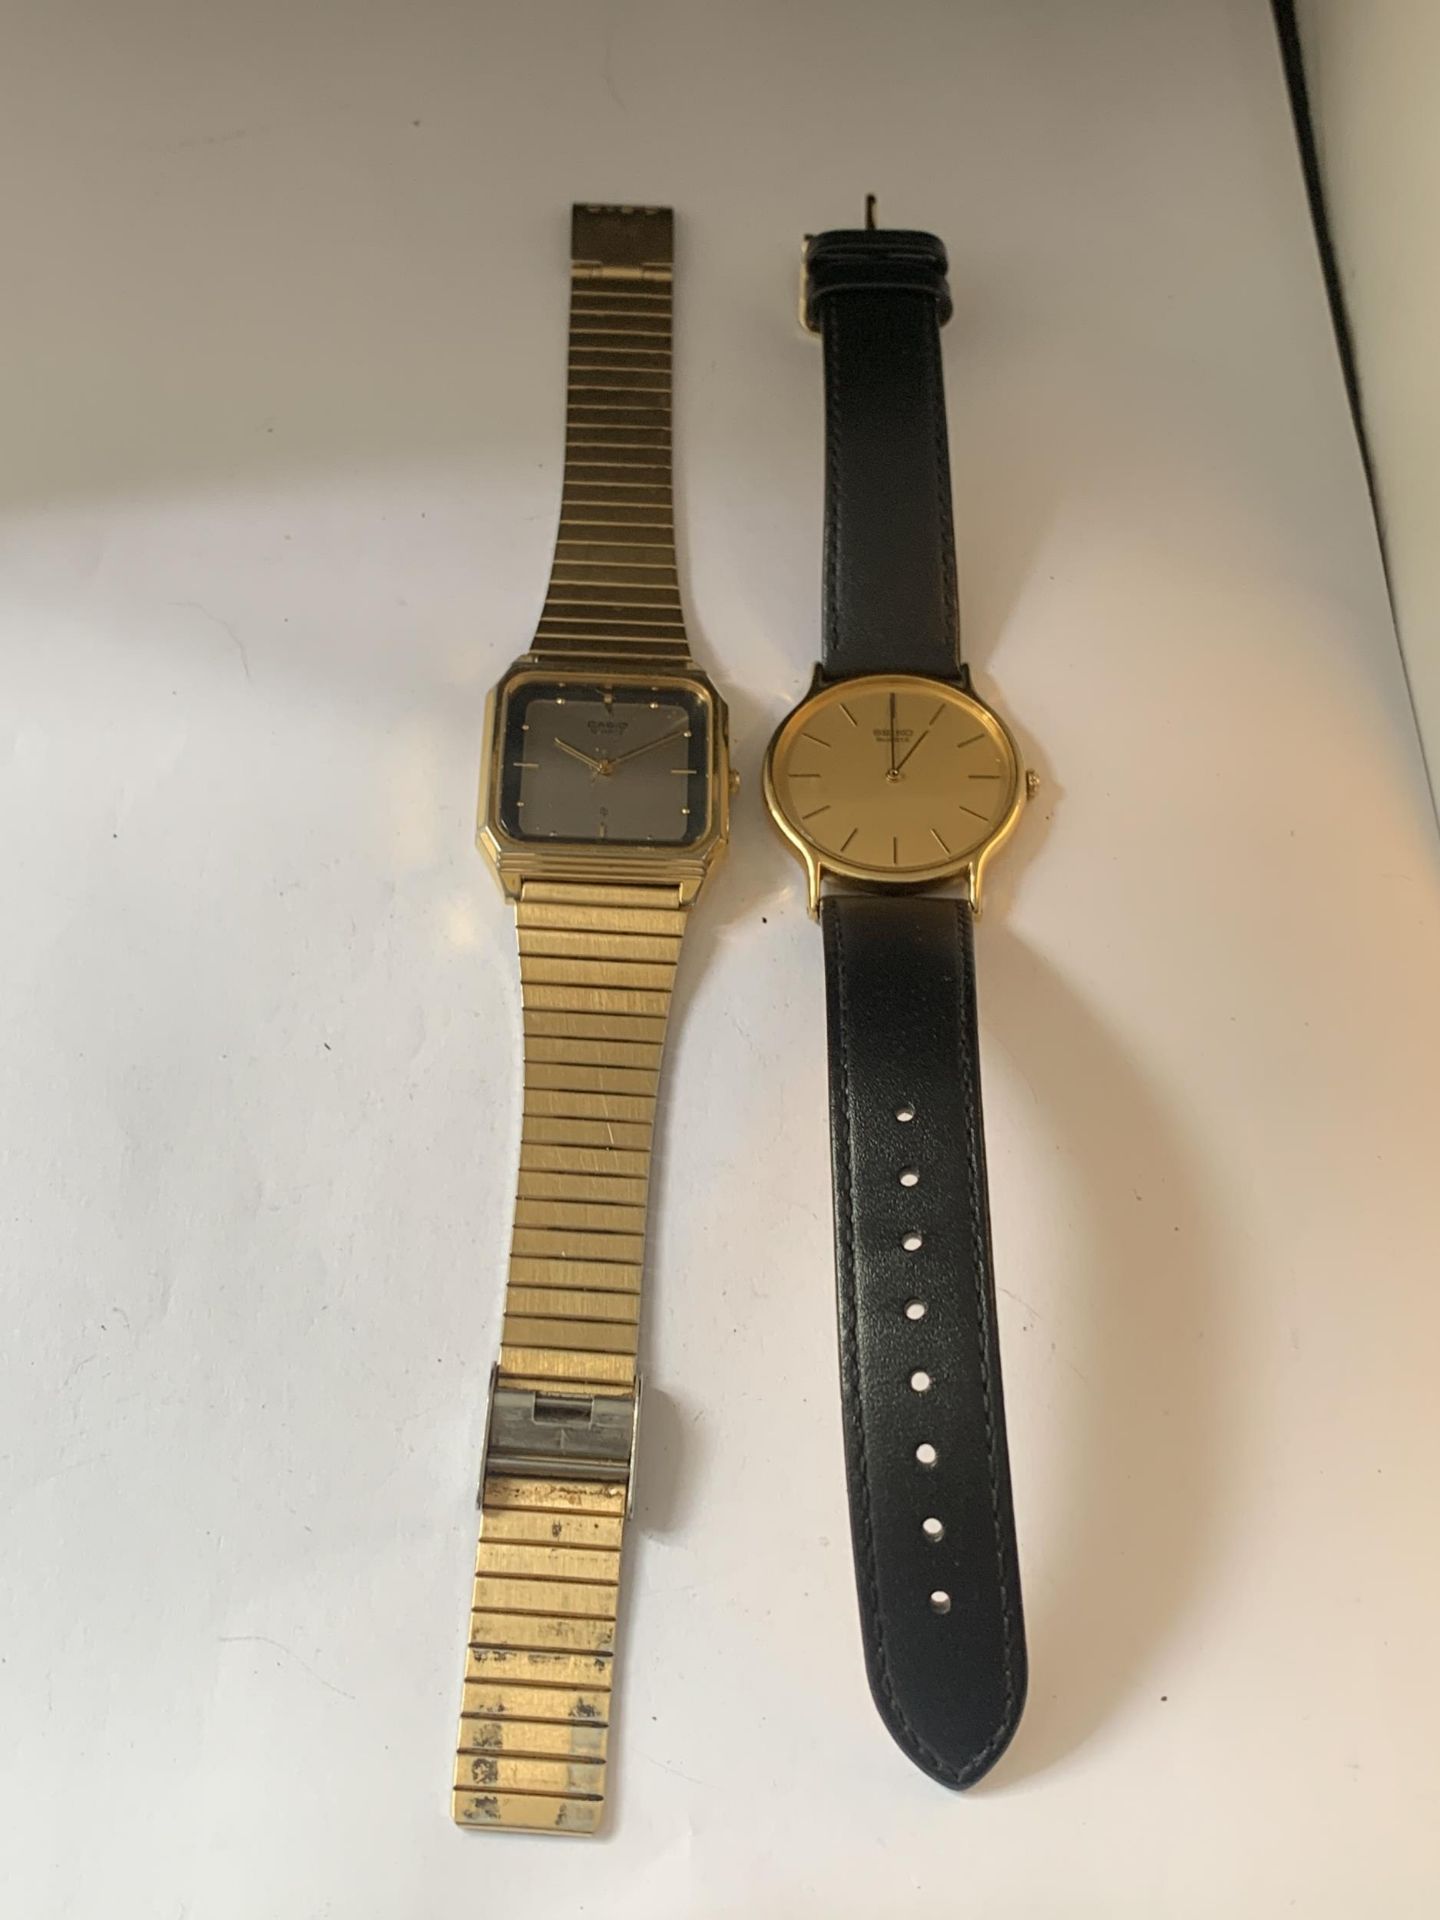 TWO WRIST WATCHES TO INCLUDE A CASIO AND A SEIKO